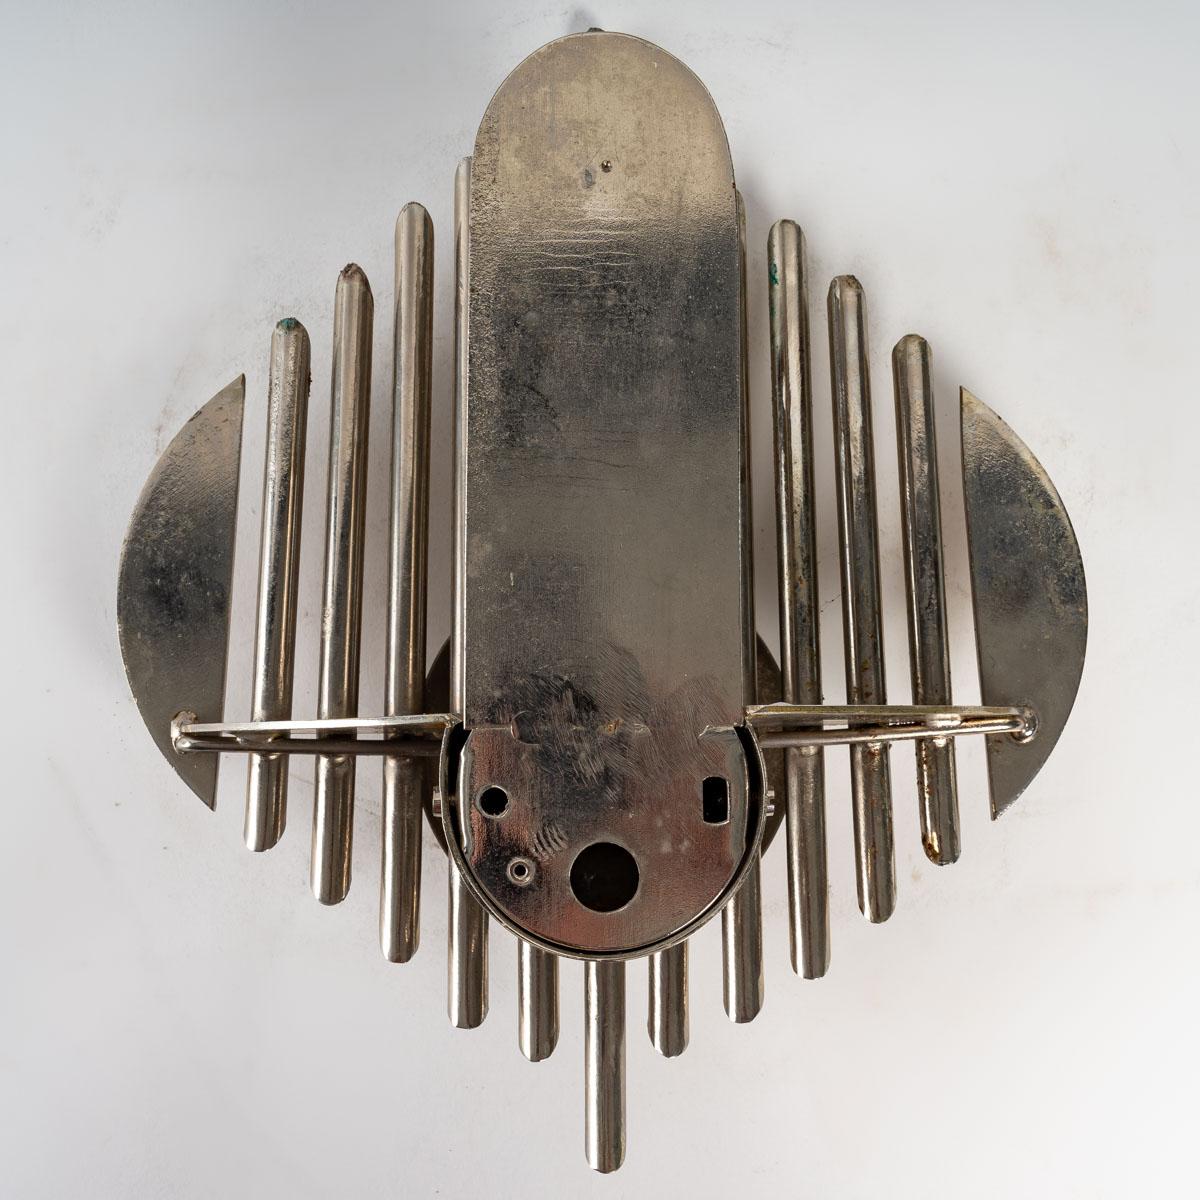 Prototype wall lamp in chromed metal with a futuristic organ motif. Electrification system on the back of the piece.
France, 1970s.